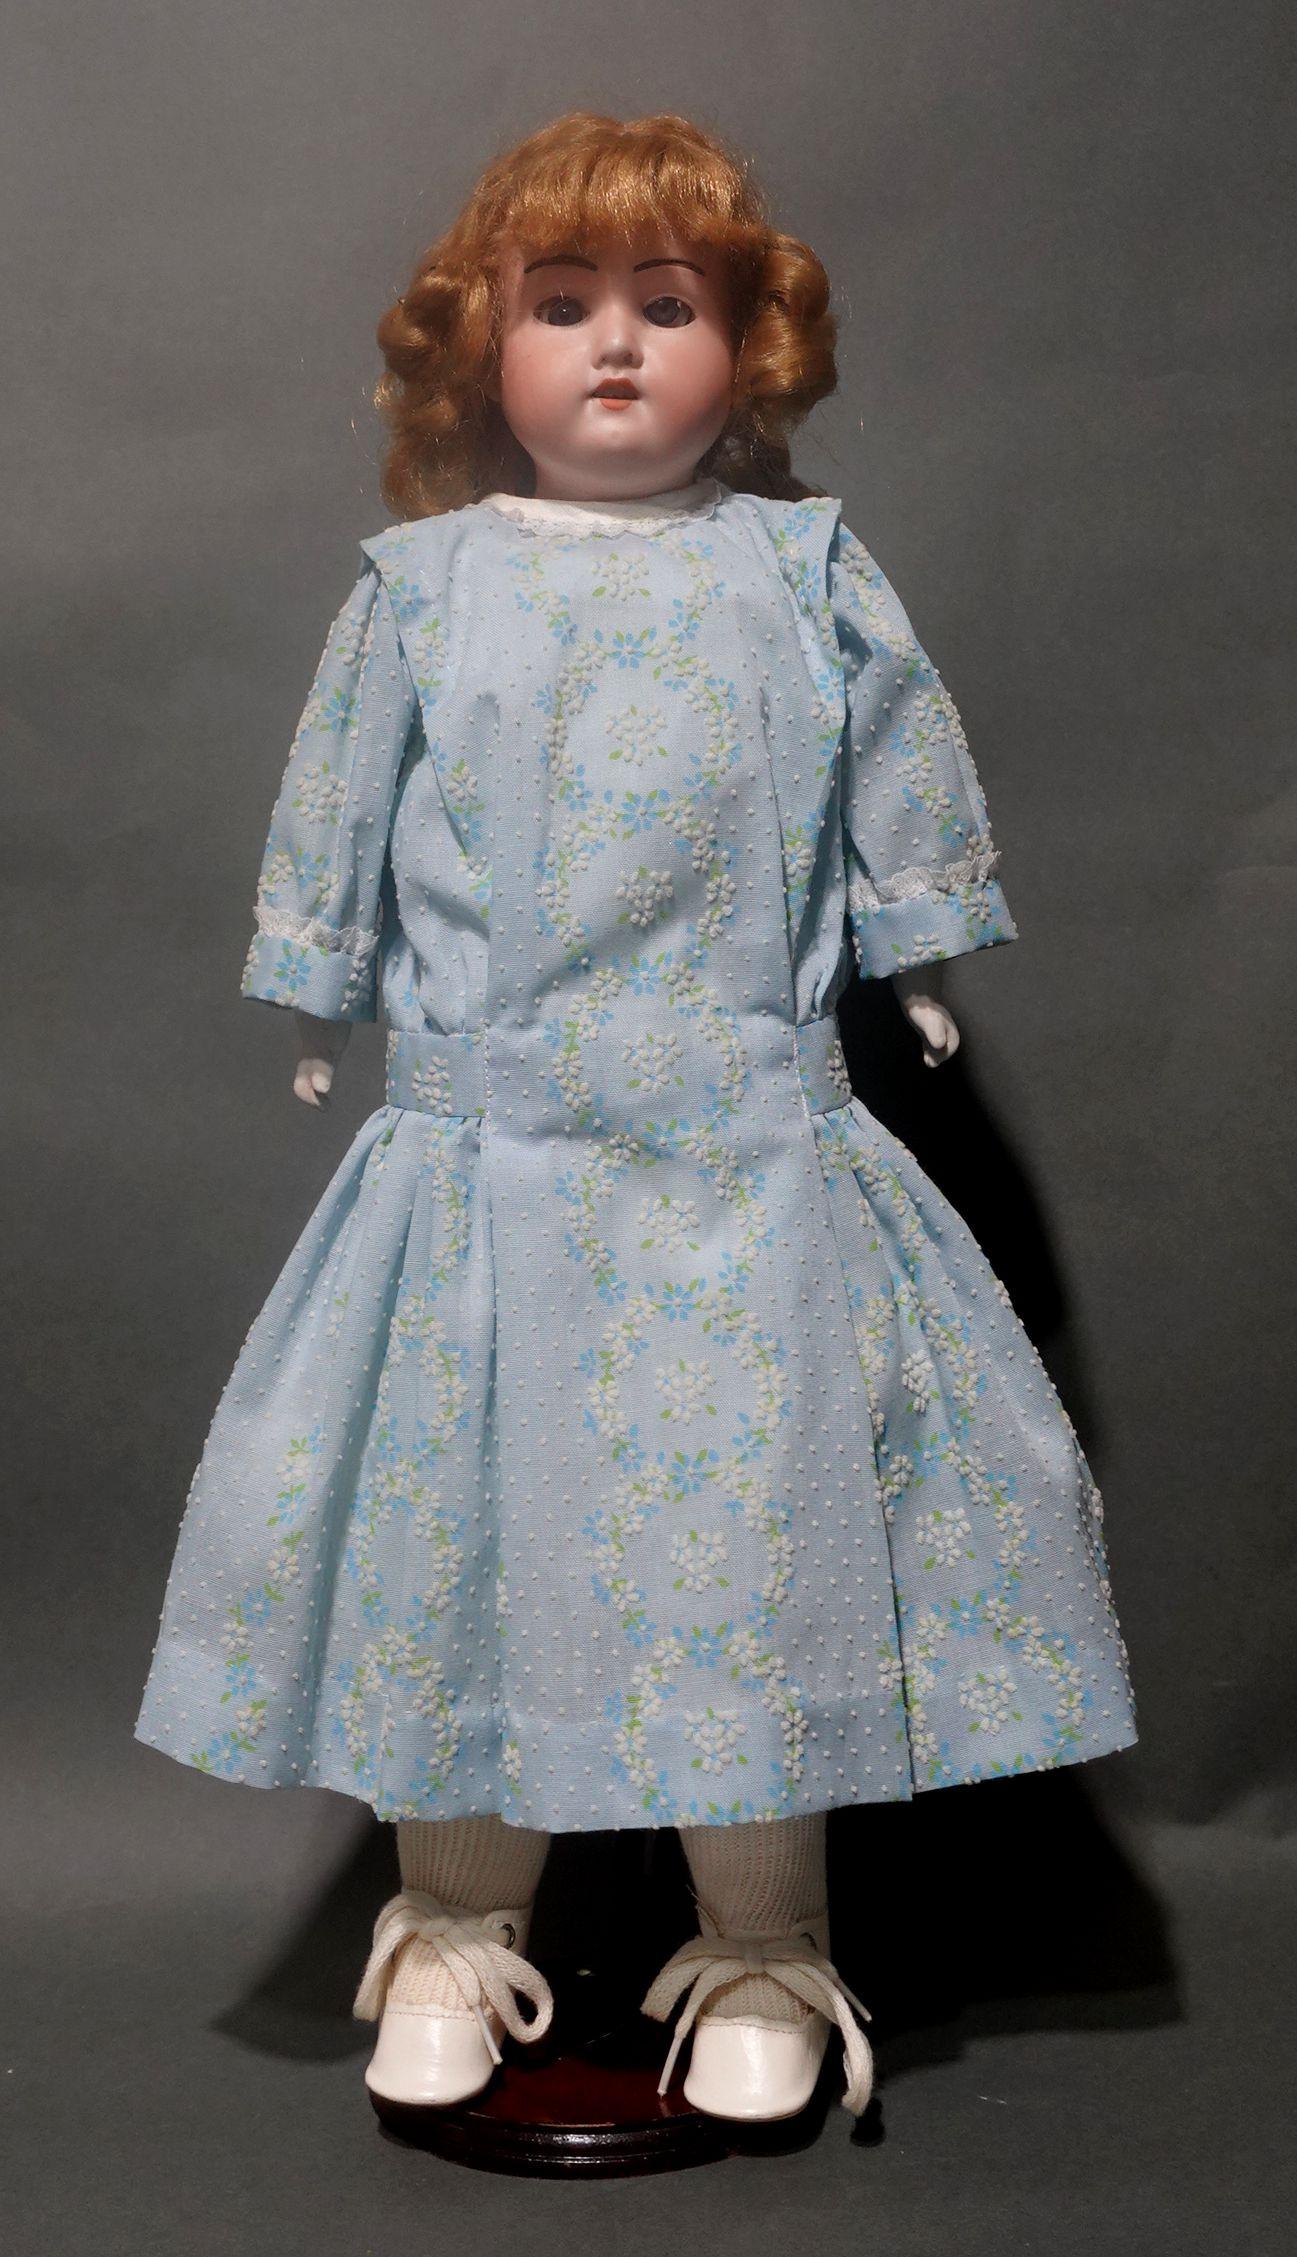 An original Armand Marseille doll, etched into the bisque at her nape is her edition number “370 AM-2/0X-DEP”. Bisque head and hands. Her feet wear perfect little white leather shoes with buttons. Beautiful blue glass eyes that seamlessly open and